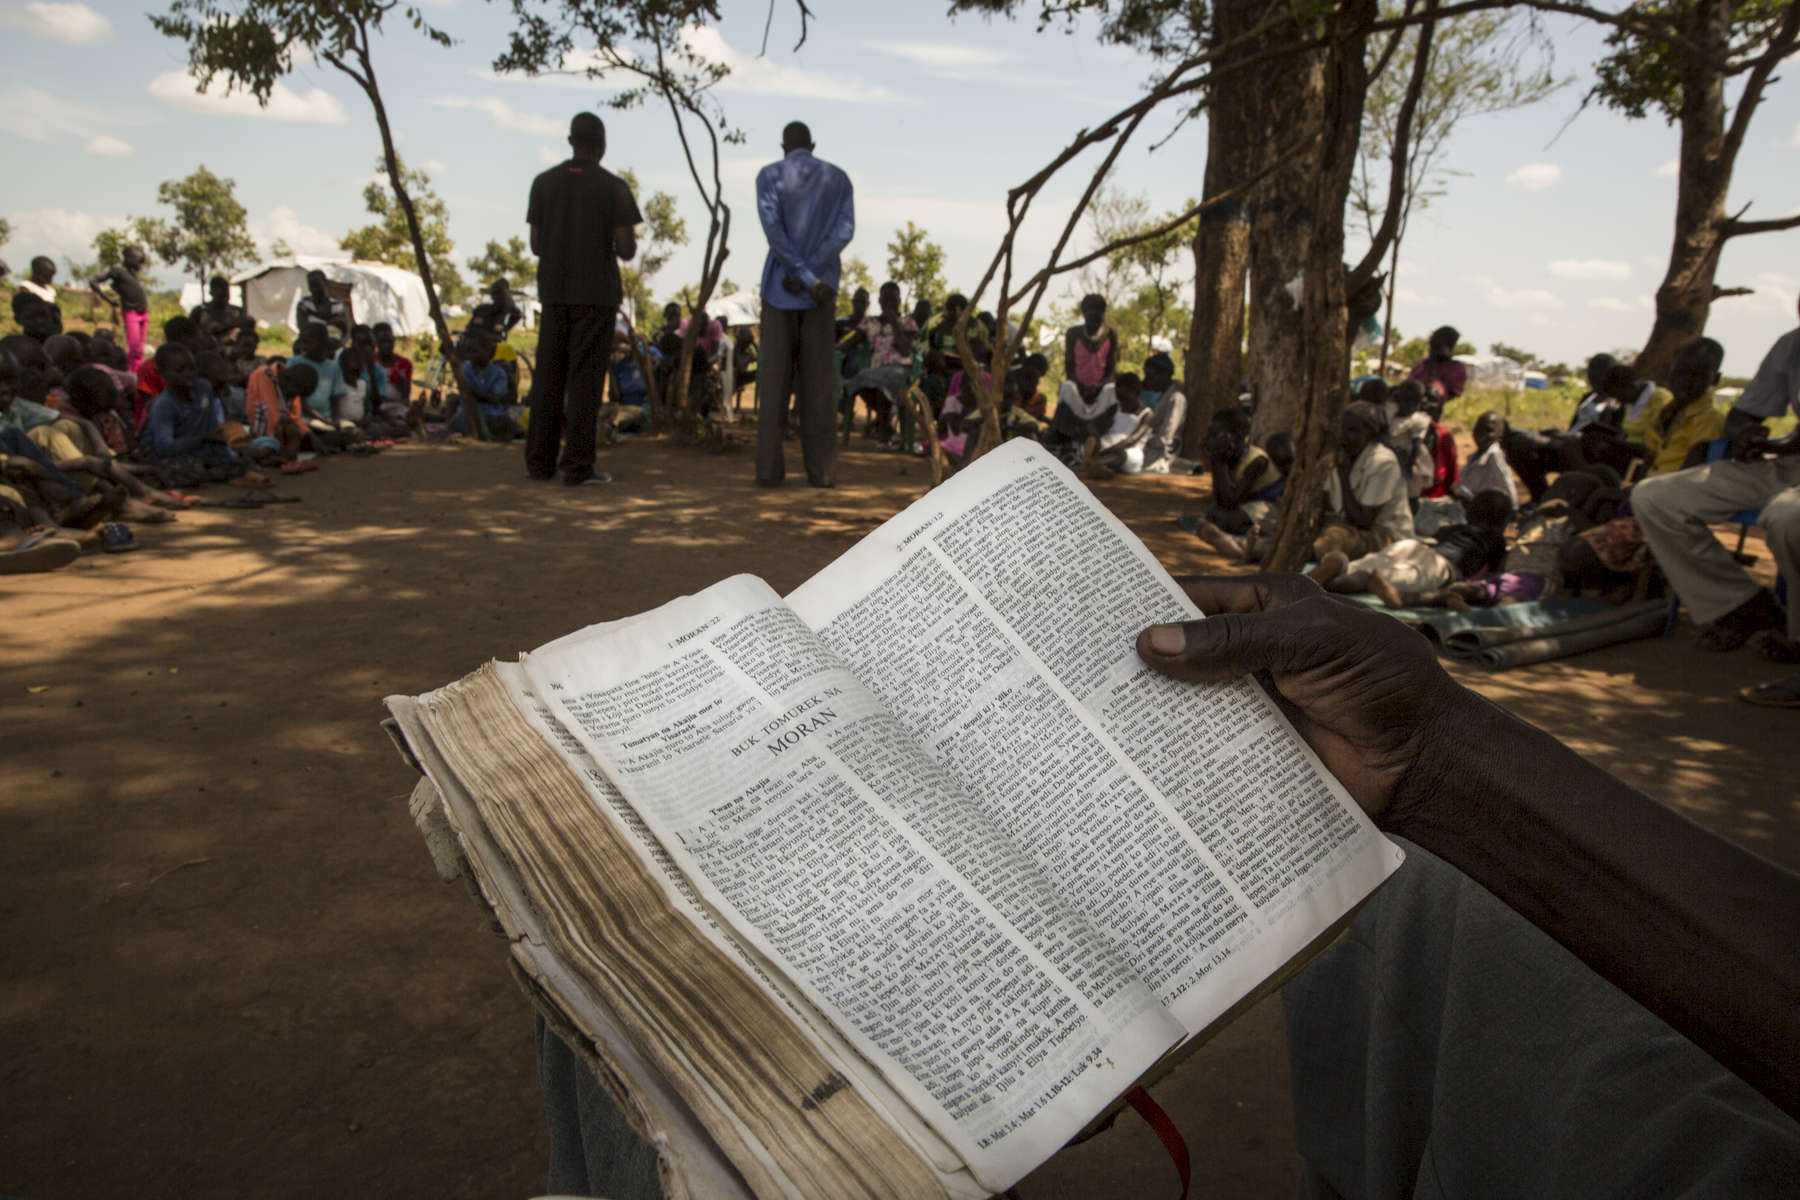 ADJUMANI DISTRICT-UGANDA:  During a Catholic Sunday prayer service held under the shade of a tree, refugees sit and pray as priests deliver their sermon.The Onward Struggle:  A refugee crisis in Uganda deepens as South Sudanese Refugees are forced to leave their country behind. The outbreak of violence in the capital Juba last July created a humanitarian crisis in northern Uganda as thousands of South Sudanese sought refugee there. The country is hosting the lion’s share of South Sudanese refugees, with 373,626, more than a third of them arriving since early July.The fighting was a major setback to peace efforts in South Sudan, coming as the troubled new nation prepared to celebrate its fifth anniversary, amid a short lived peace deal between supporters of President Salva Kiir and former First Vice President Riek Machar. South Sudan now joins Syria, Afghanistan and Somalia as countries which have produced more than a million refugees. While some South Sudanese may attempt to head for Europe, the numbers within east Africa are comparable in scale to recent refugee flows to Europe from the Middle East, and their traumatic experiences due to war are often just as hellish. More than 85 percent of the refugees in this recent influx are women and children. Many children have lost one or both of their parents, some forced to become primary caregivers to siblings.With the large influx of refugees in July 2015, relief agencies had to implement stringent food rationing in the refugee settlements. Currently the international humanitarian organizations lack the necessary funds to meet the needs of the more than 200,000 refugees.